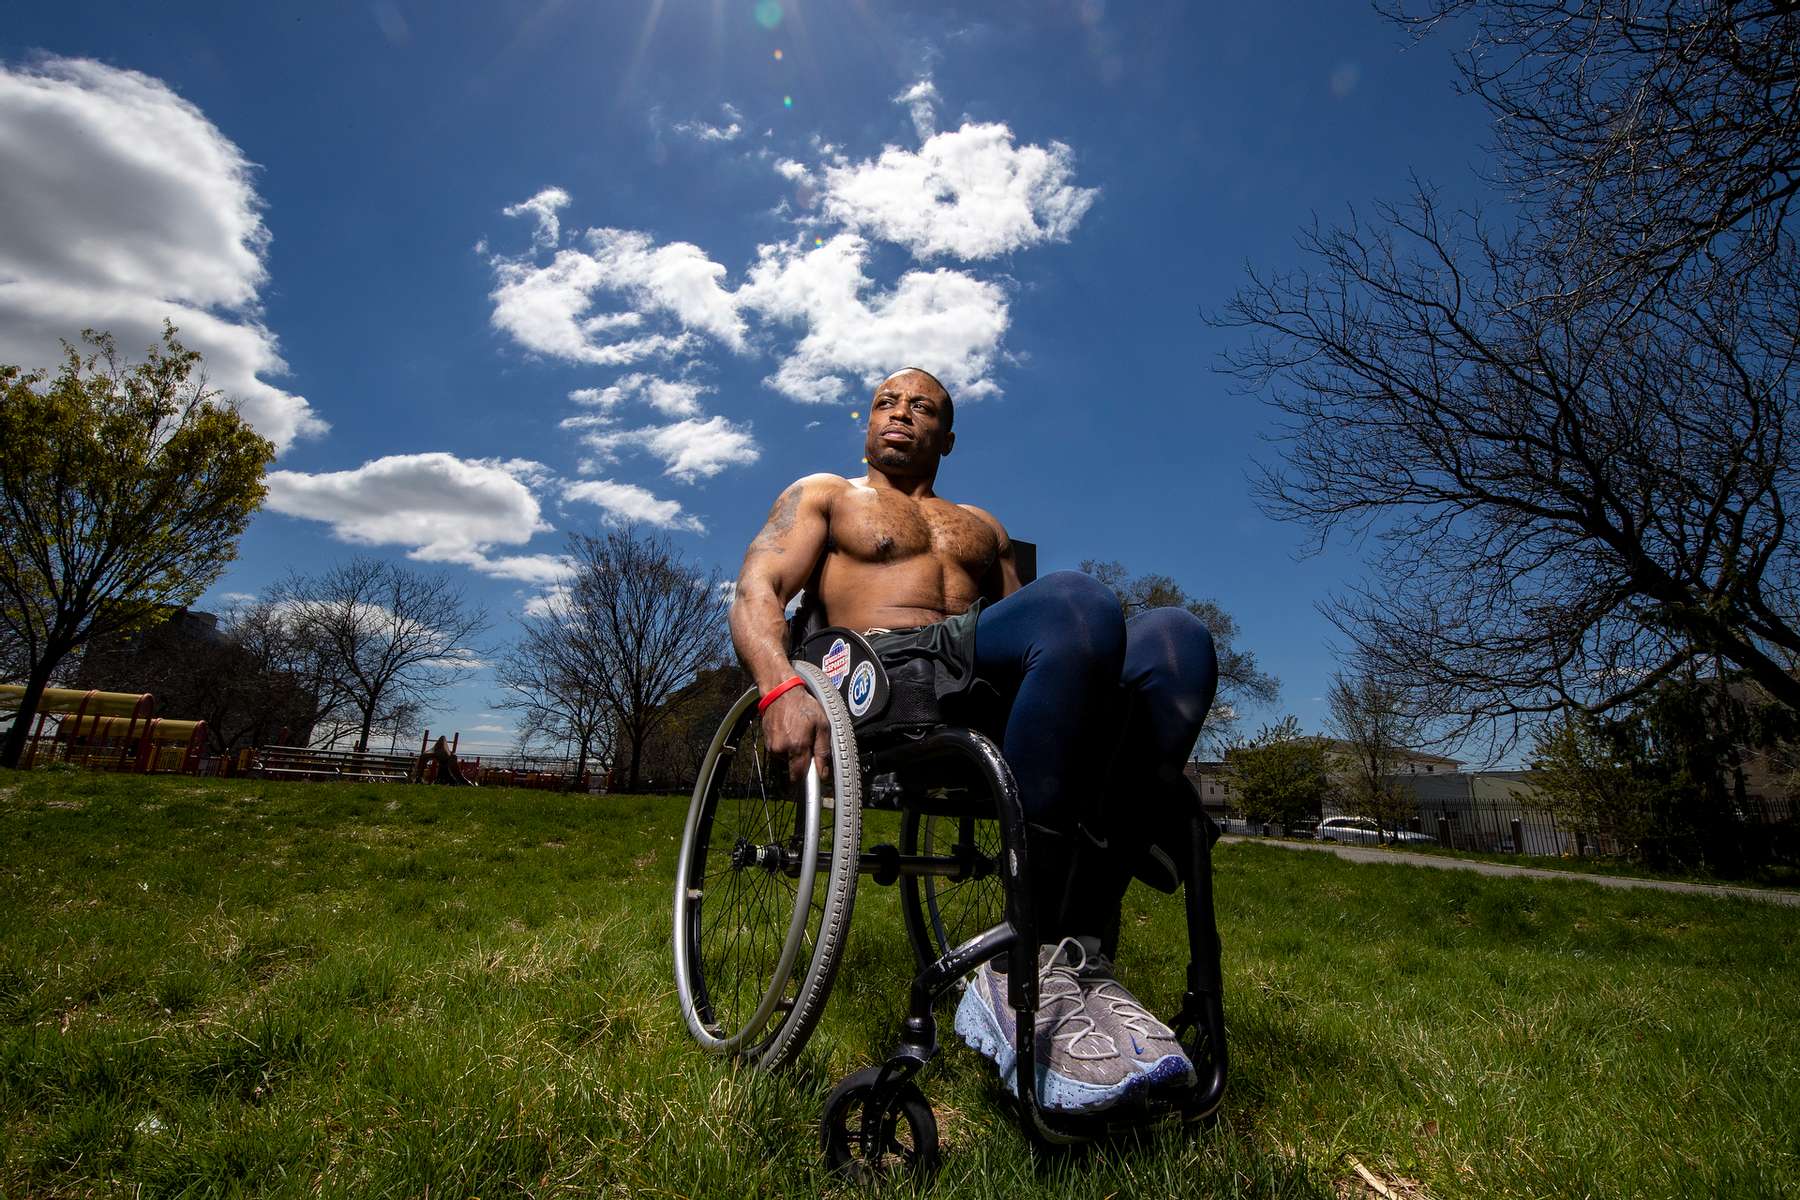 Team USA Para Powerlifter Garrison Redd poses for a portrait in his wheelchair in Robert E. Venable Park on April 13, 2021 in Brooklyn, New York. Redd was a standout high school football star running back. He also participated in boxing and baseball. In the Summer of 2005 he was the victim of a random shooting as an innocent bystander while standing on the corner of his home in Brownsville section of Brooklyn. The bullet burned the nerves surrounding the T-12 section of his spine. He has been paralyzed from the waist down ever since. He has competed in Wheelchair Racing, and Adaptive Field sports. In 2018 he turned his attention to Para Powerlifting and hopes to compete in the 2021 Tokyo Paralympic Games this summer. 